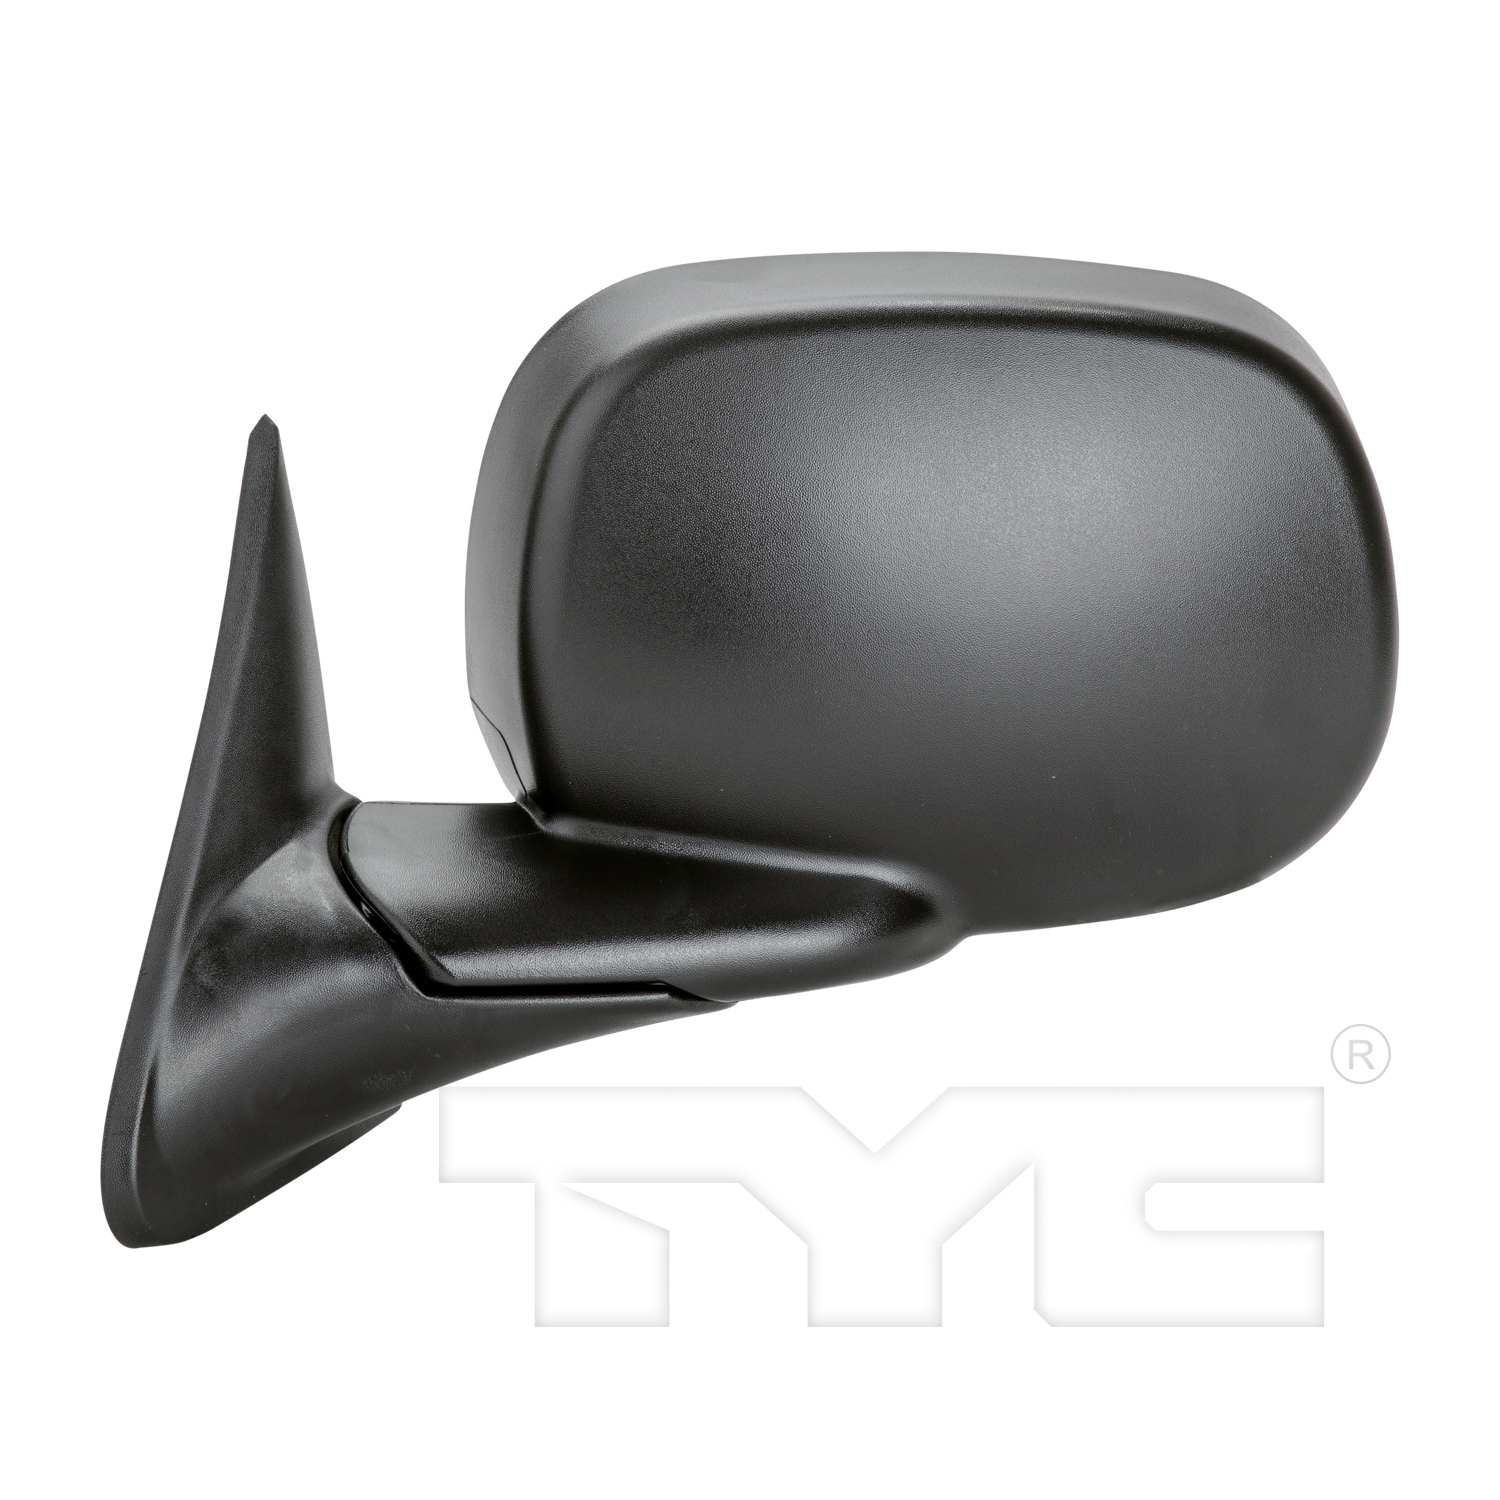 Aftermarket MIRRORS for DODGE - RAM 1500, RAM 1500,98-00,LT Mirror outside rear view